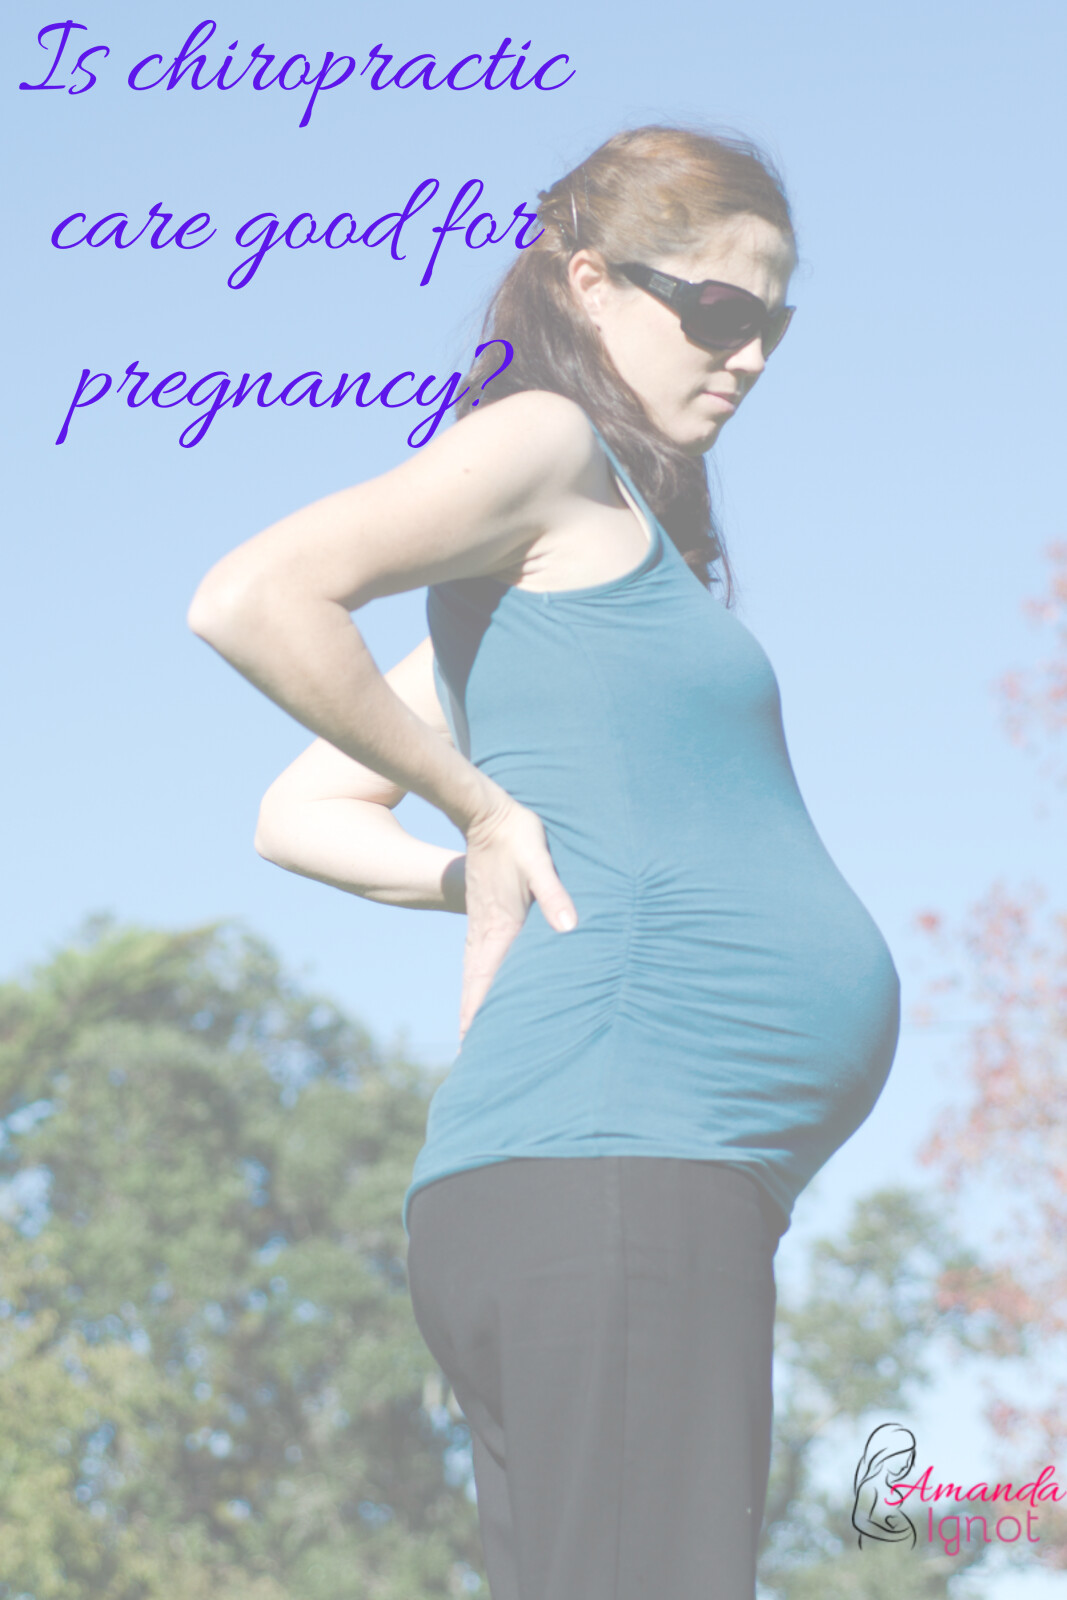 Is chiropractic care good for pregnancy?